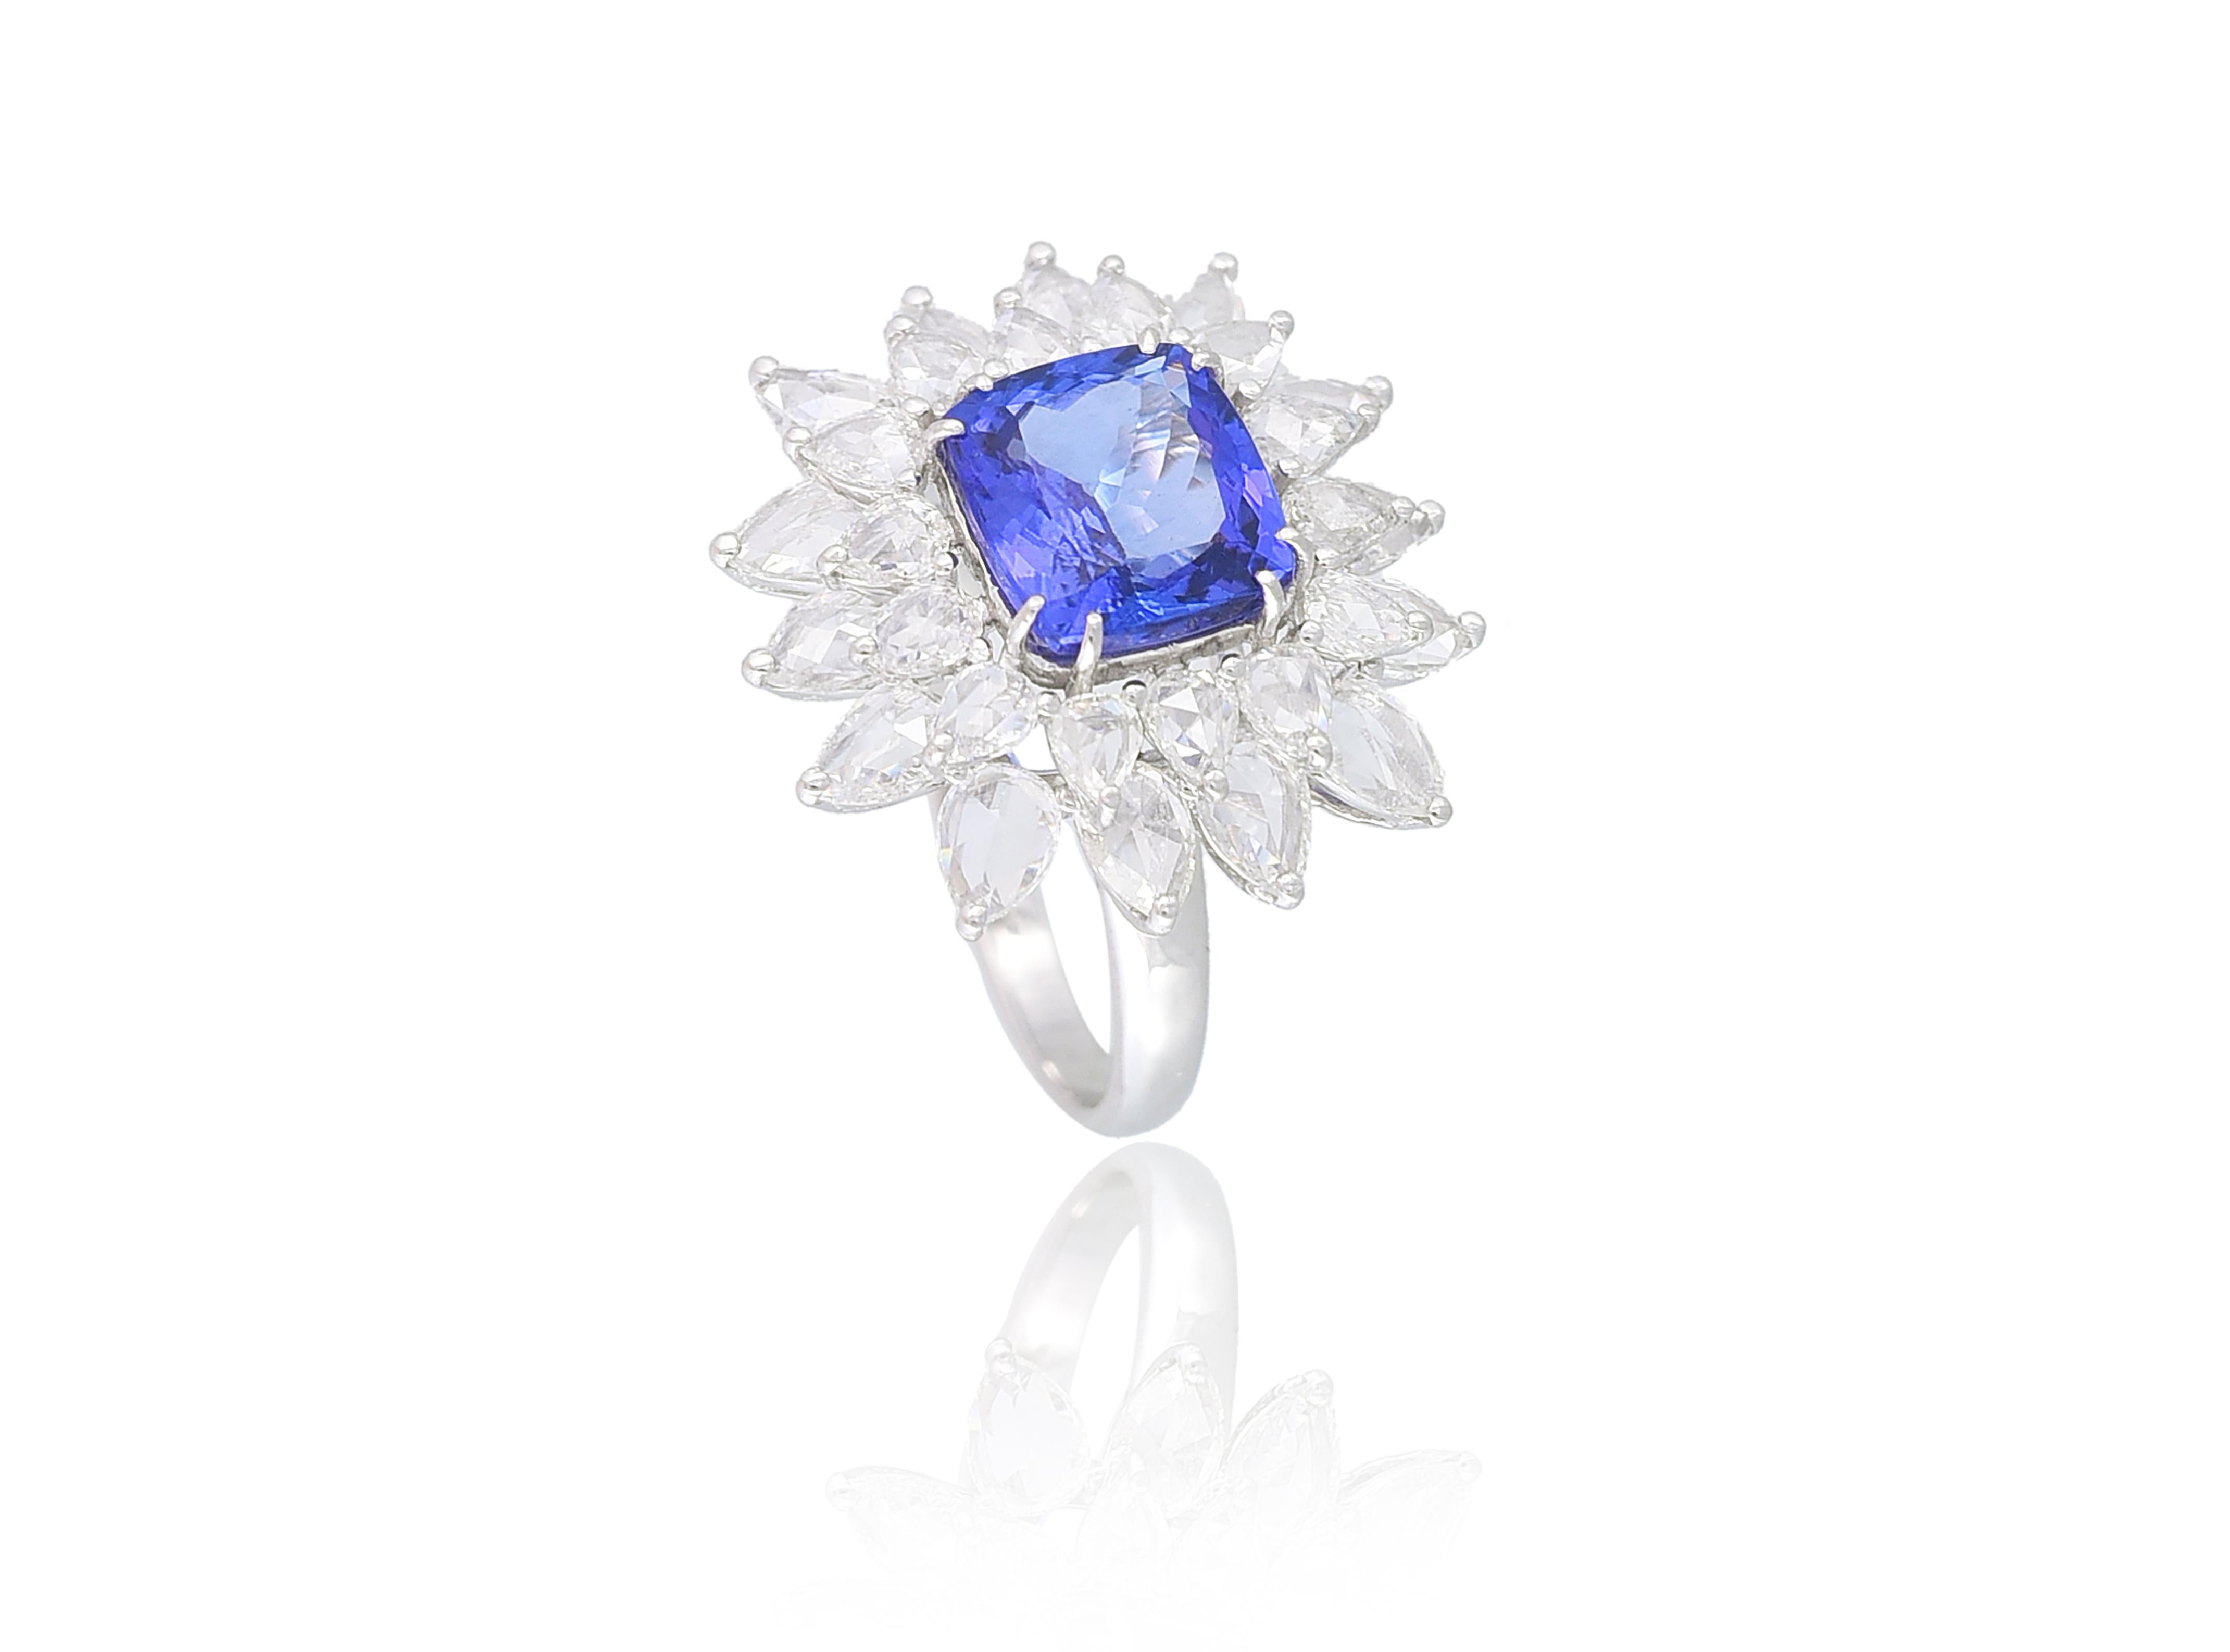 A gorgeous square Tanzanite & Rose Cut Diamonds set in 18K white gold. The weight of the Tanzanite is 3.55 carats. The Tanzanite is from Tanzanite and completely natural without any treatment. The weight of the Rose Cut Diamonds is 2.90 carats. The